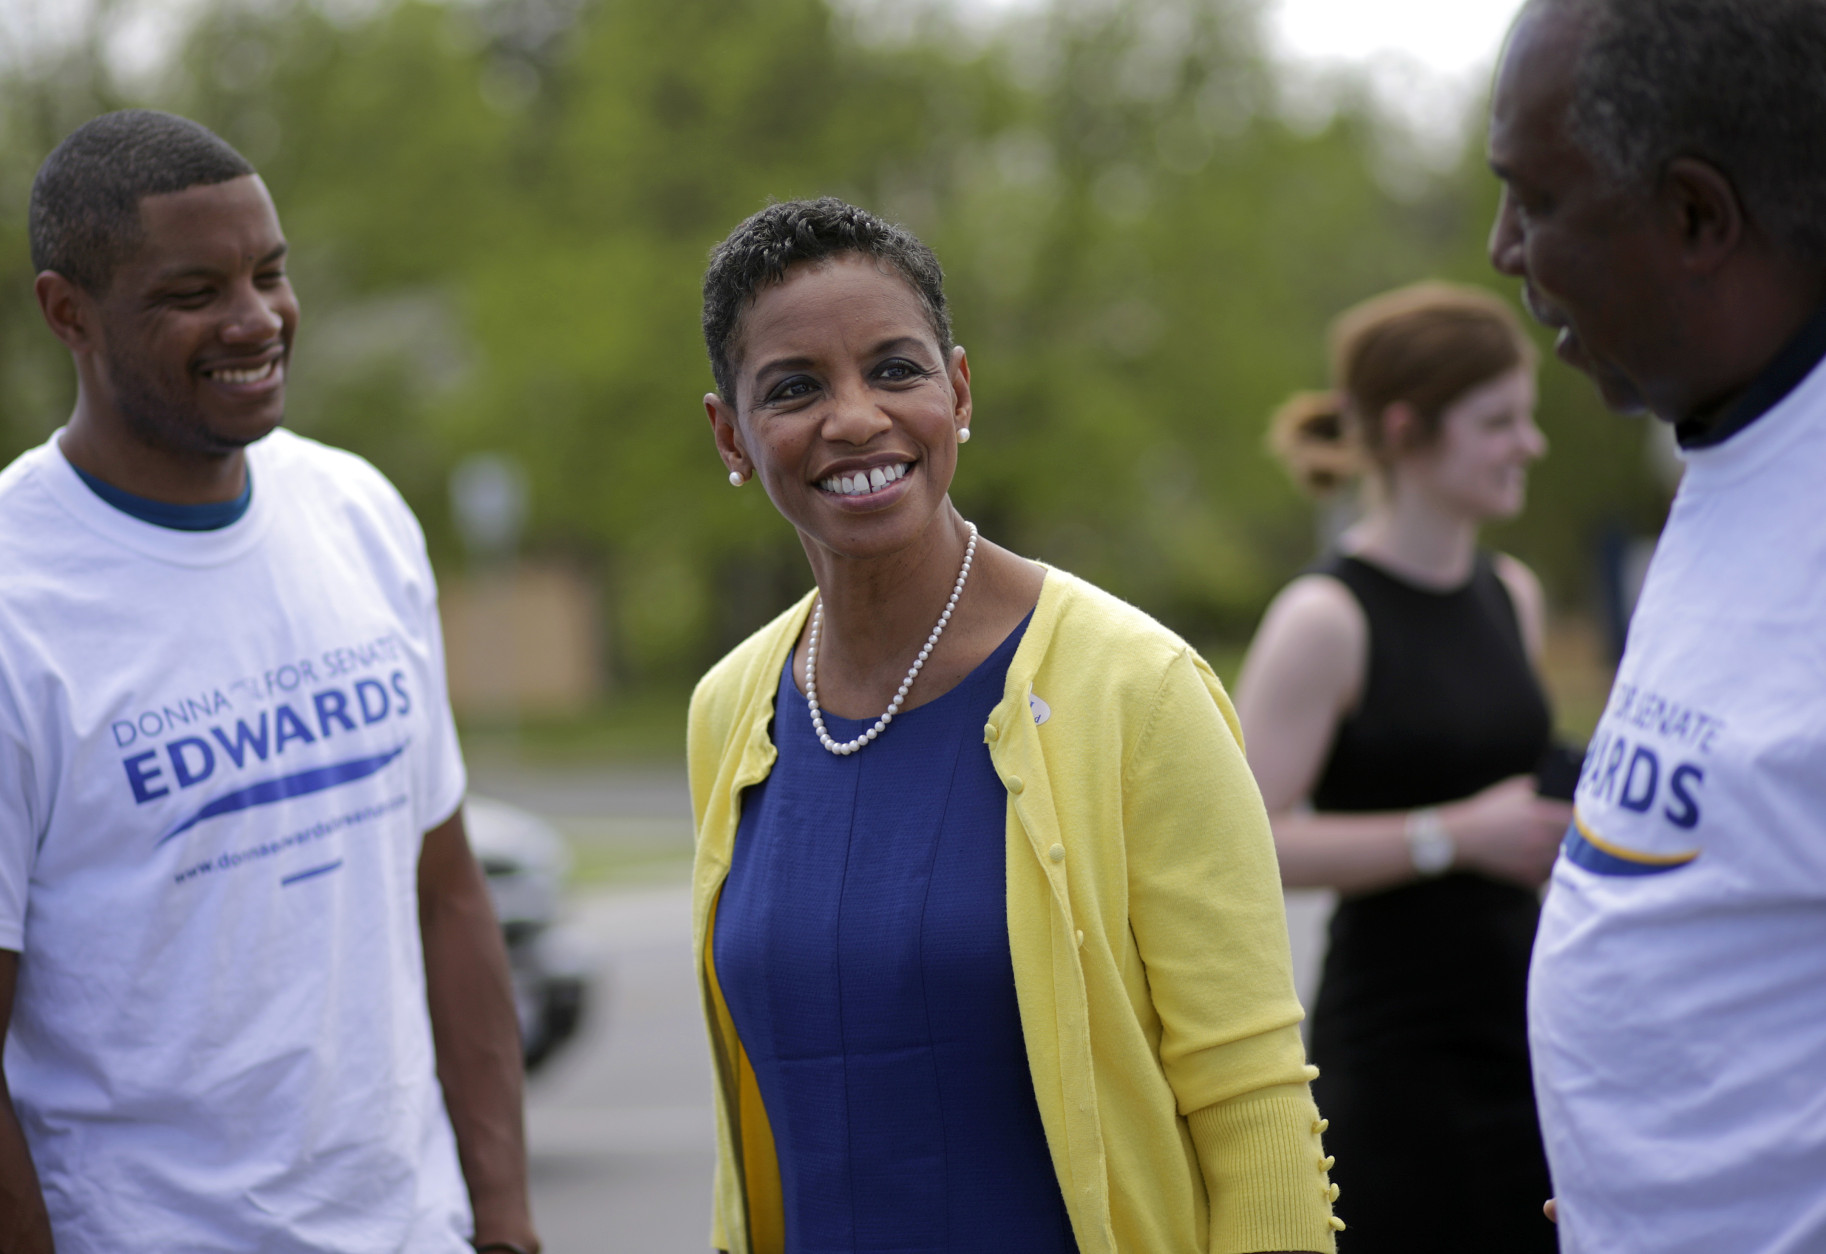 Democratic U.S. Senate candidate, Rep. Donna Edwards, D-Md., center, and her son Jared, back left, greet volunteers outside a polling place at Winfield Elementary School in Windsor Mill, Md., Tuesday, April 26, 2016. Edwards is running against Rep. Chris Van Hollen, D-Md., in the Democratic primary for U.S. Senate. (AP Photo/Patrick Semansky)